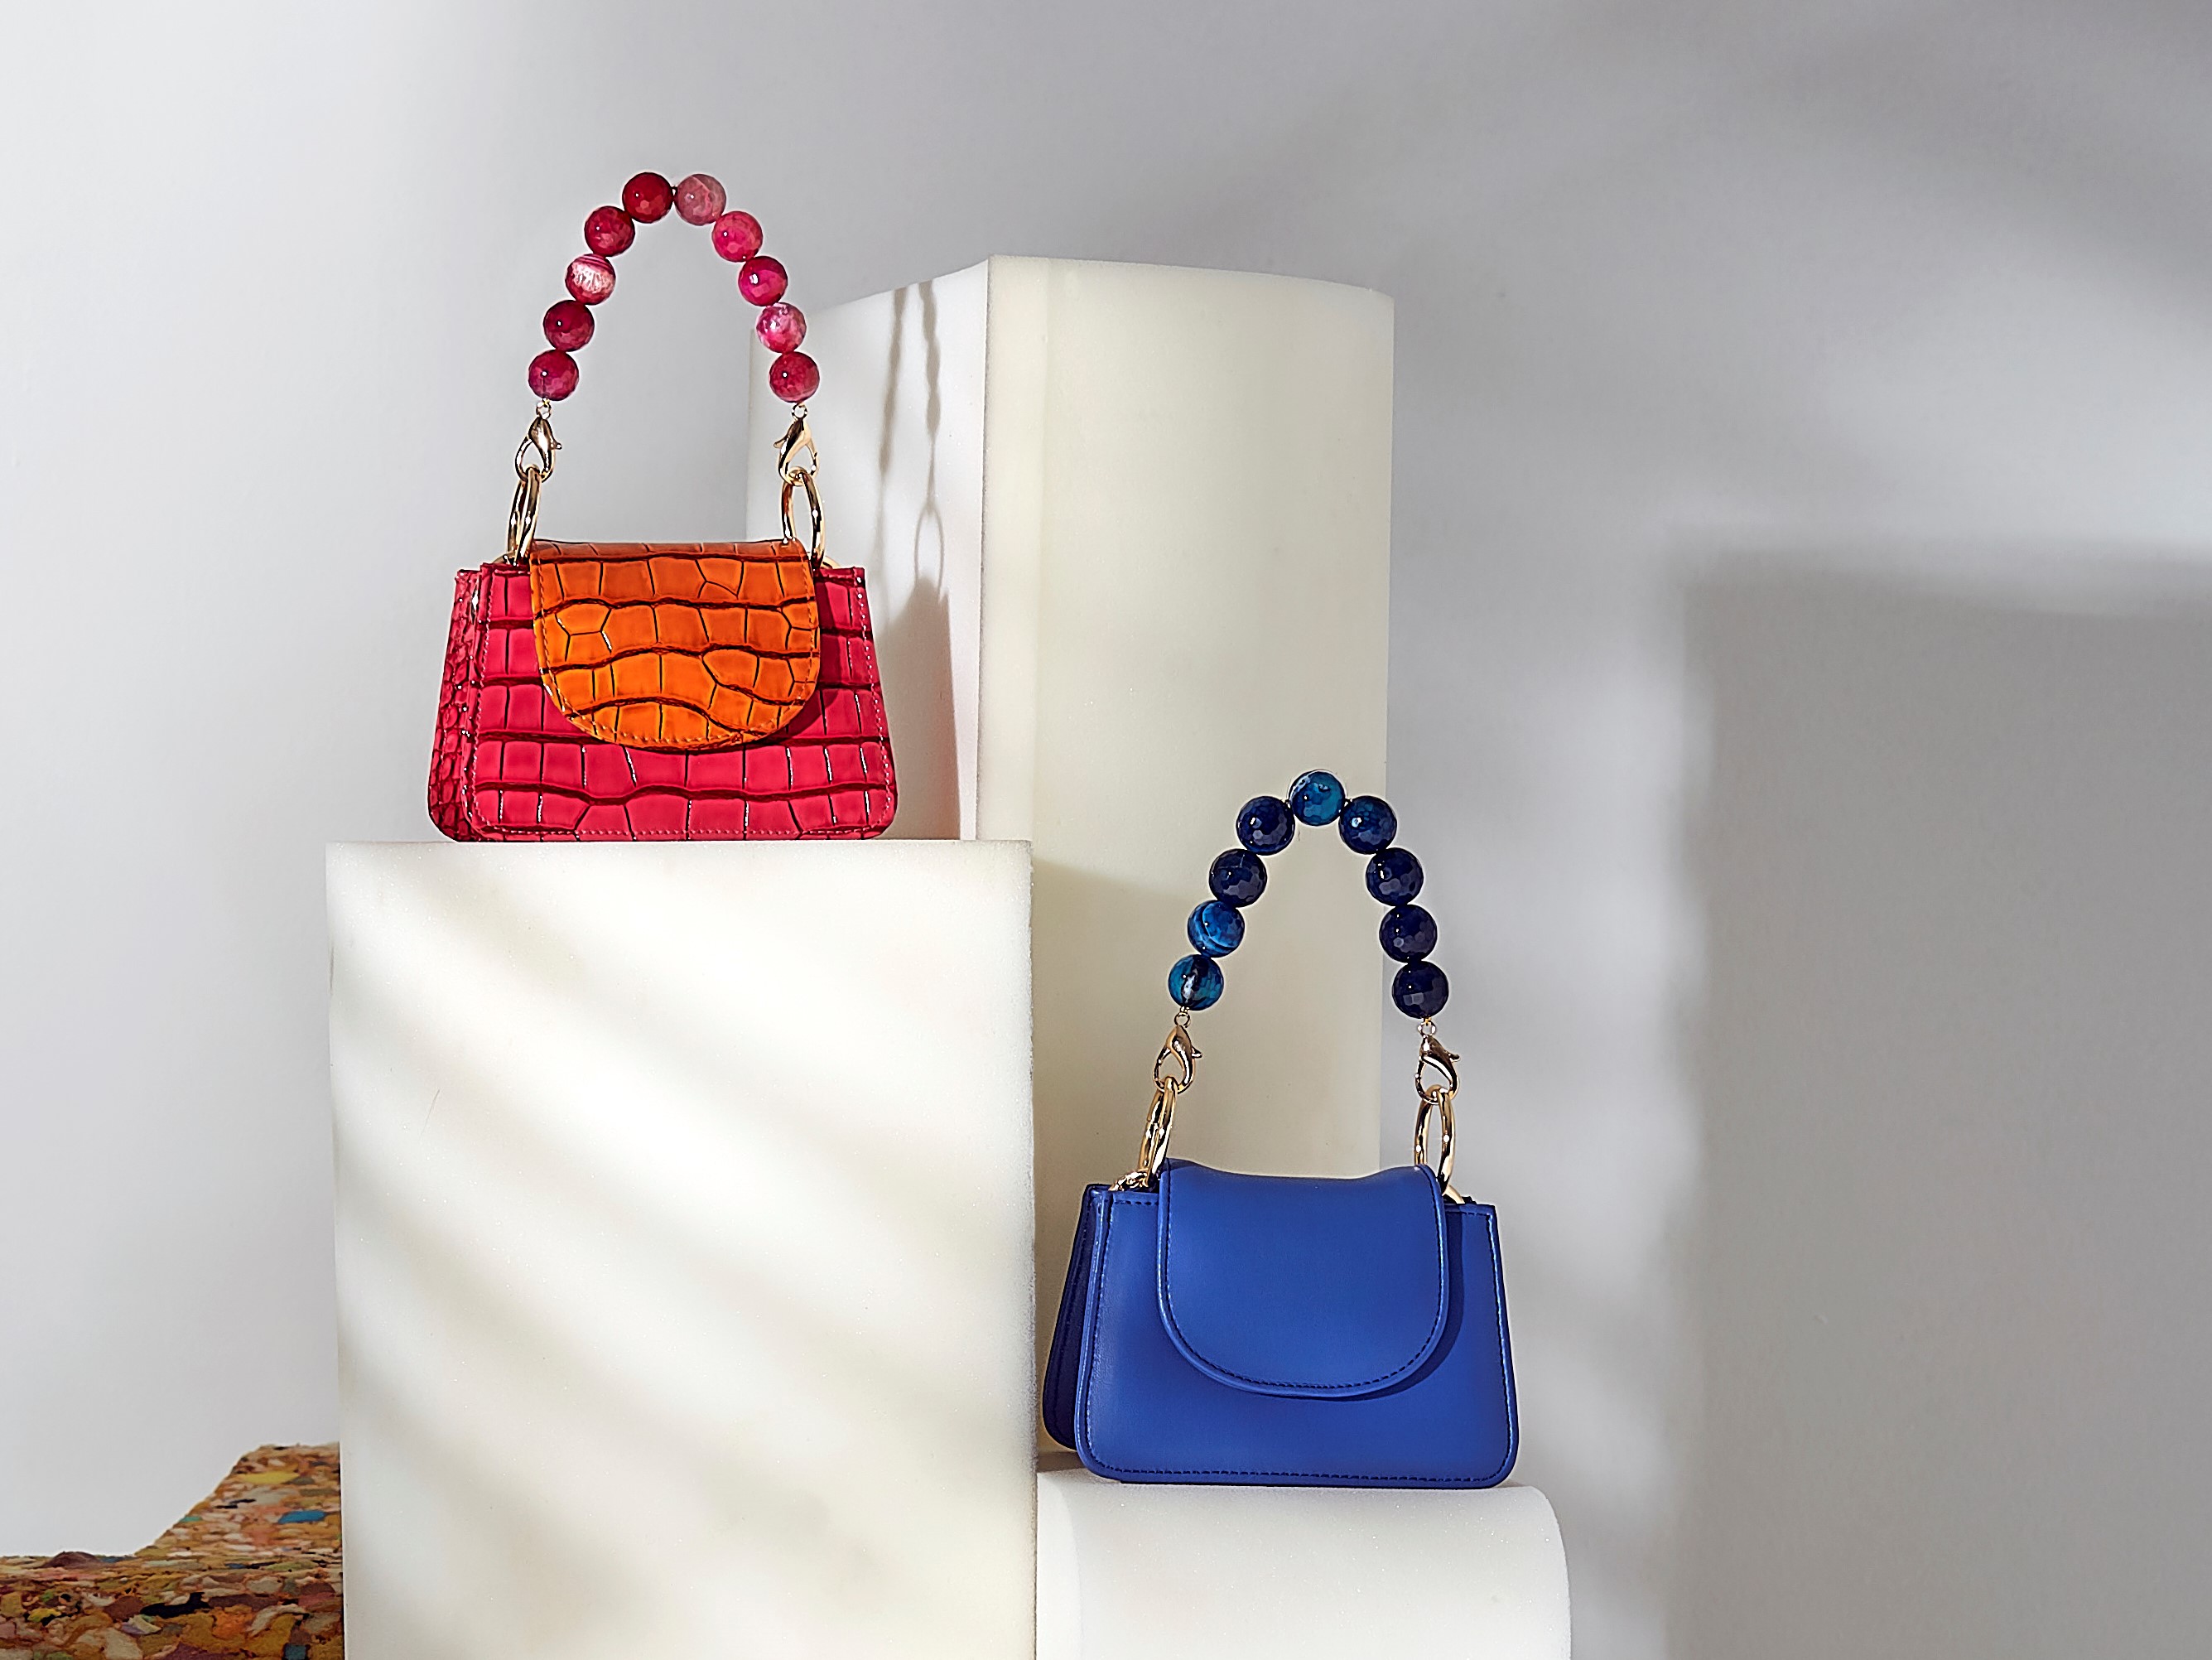 10 EGYPTIAN DESIGNER BAGS YOU MUST OWN NOW